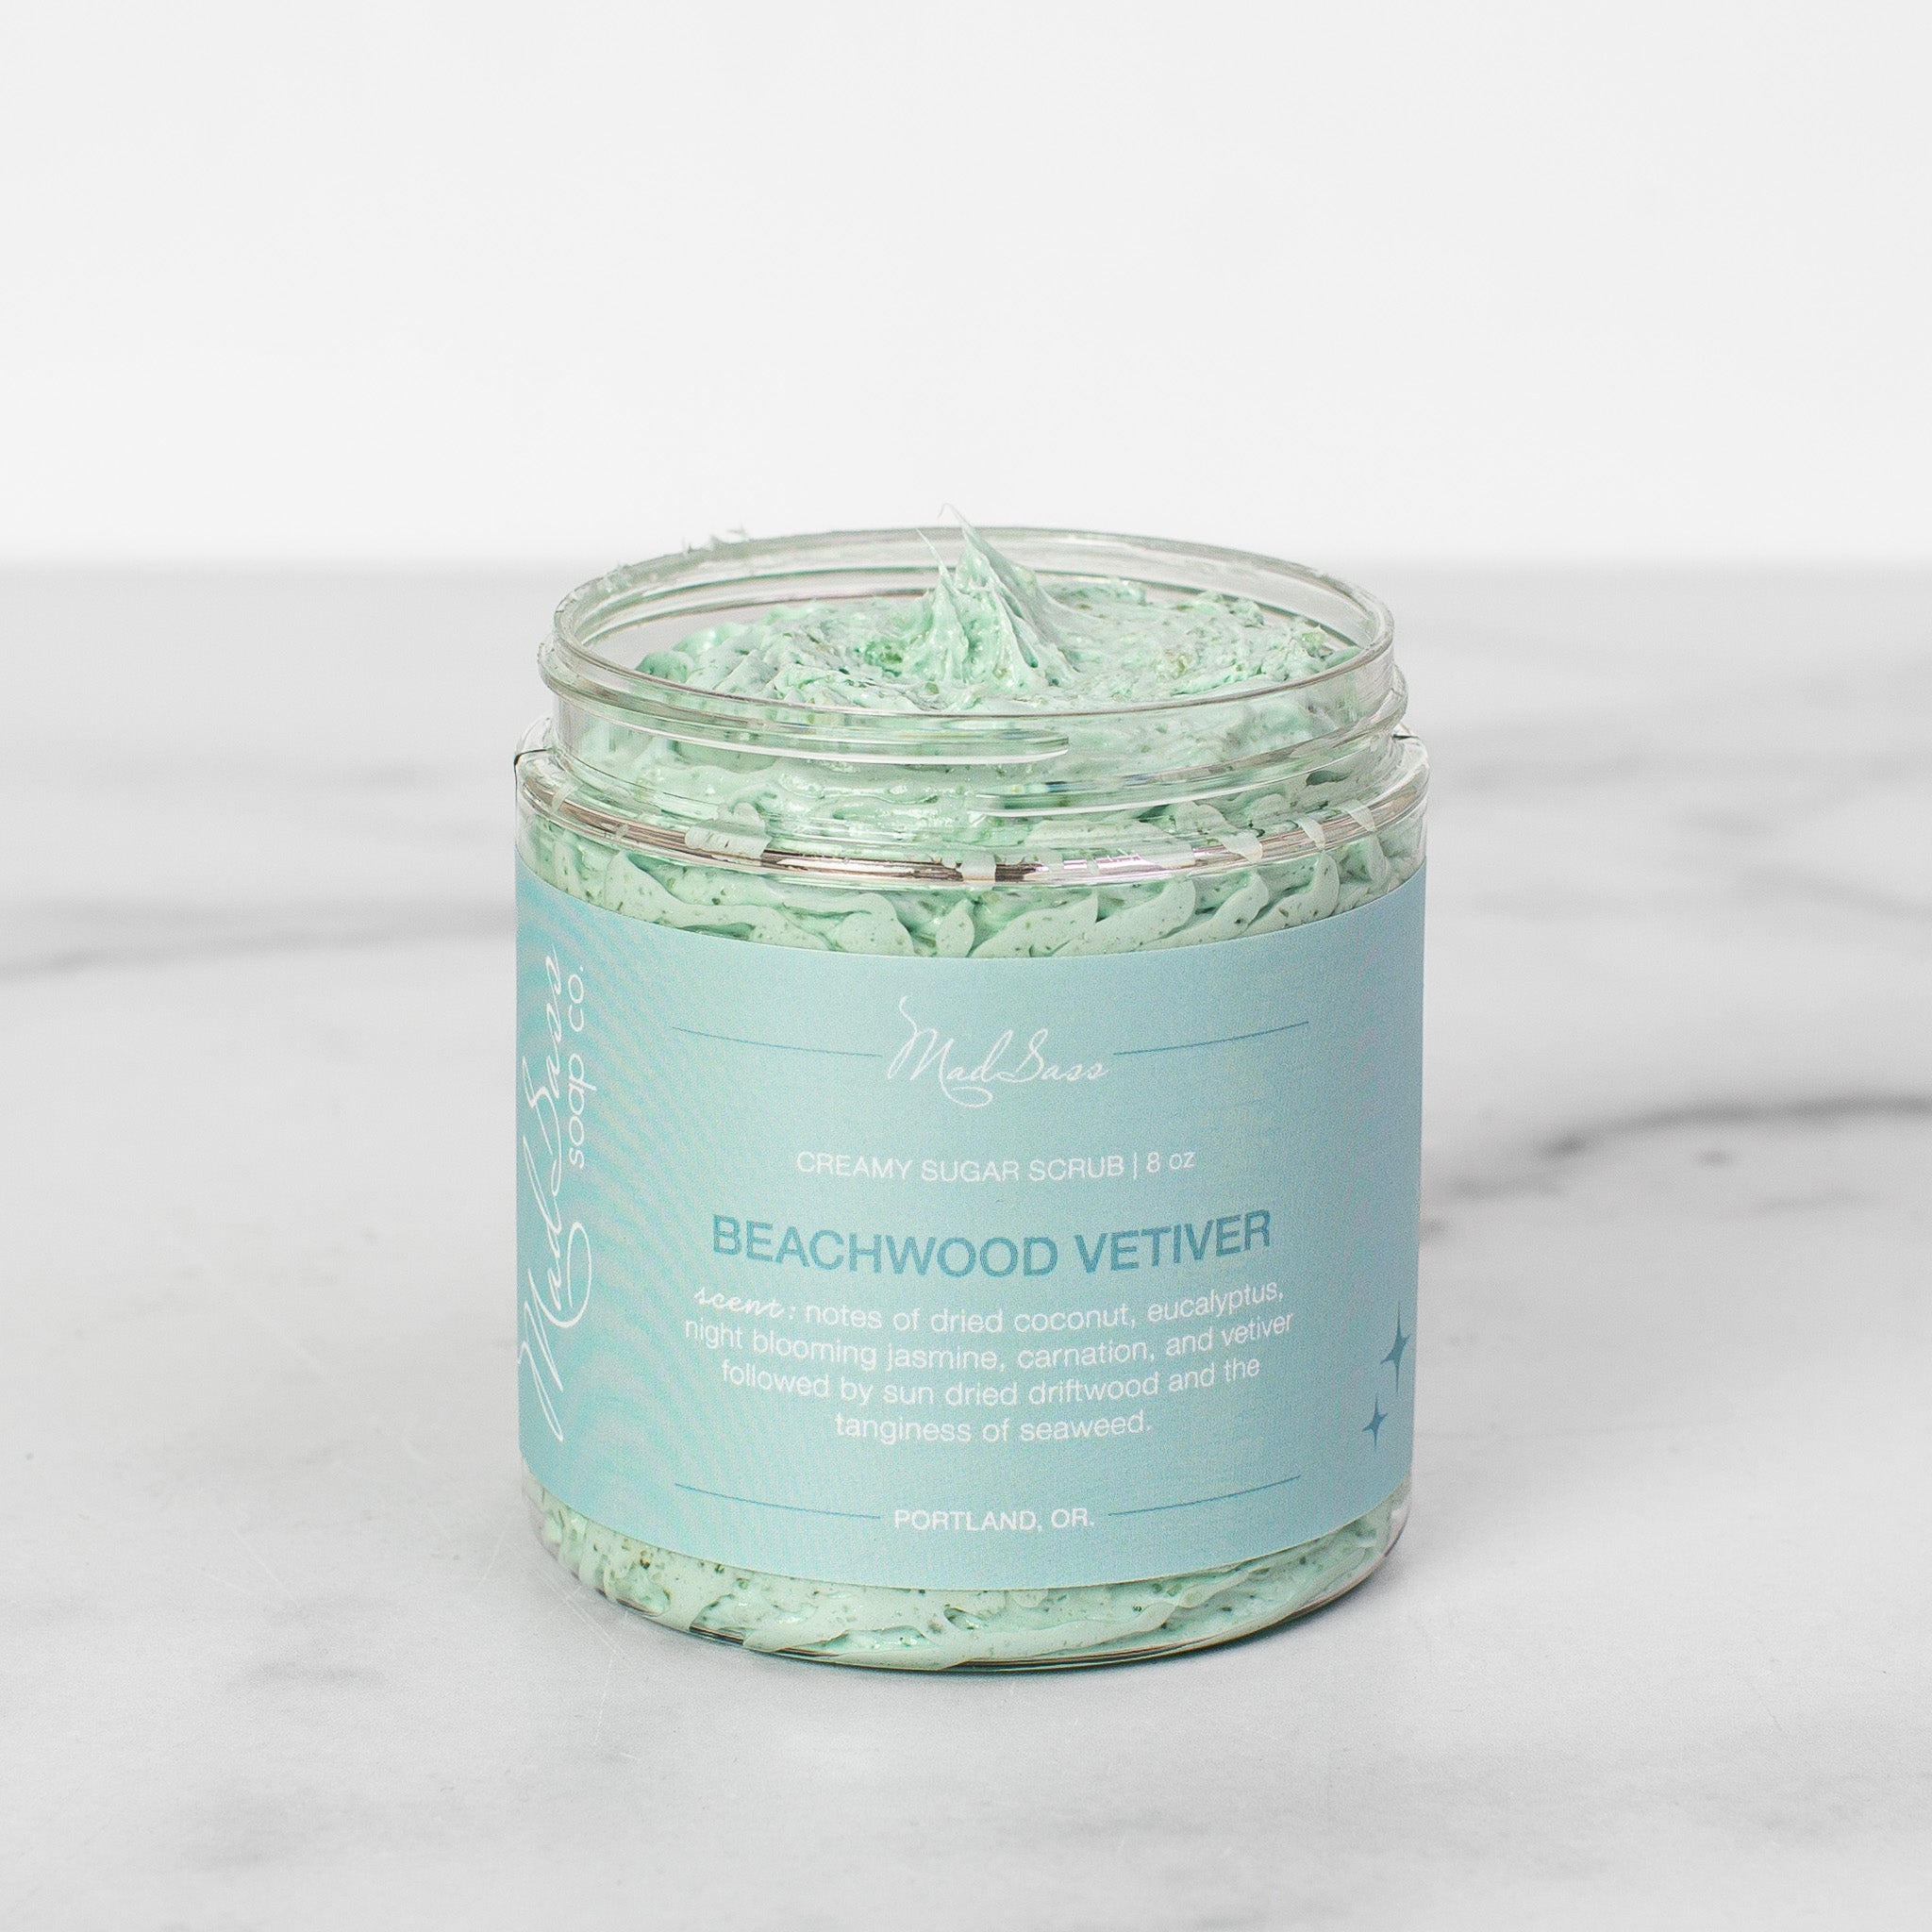 One container of Beachwood Vetiver Creamy Sugar Scrubs on a white background. Beachwood Vetiver is a light blue scrub in a clear tub.